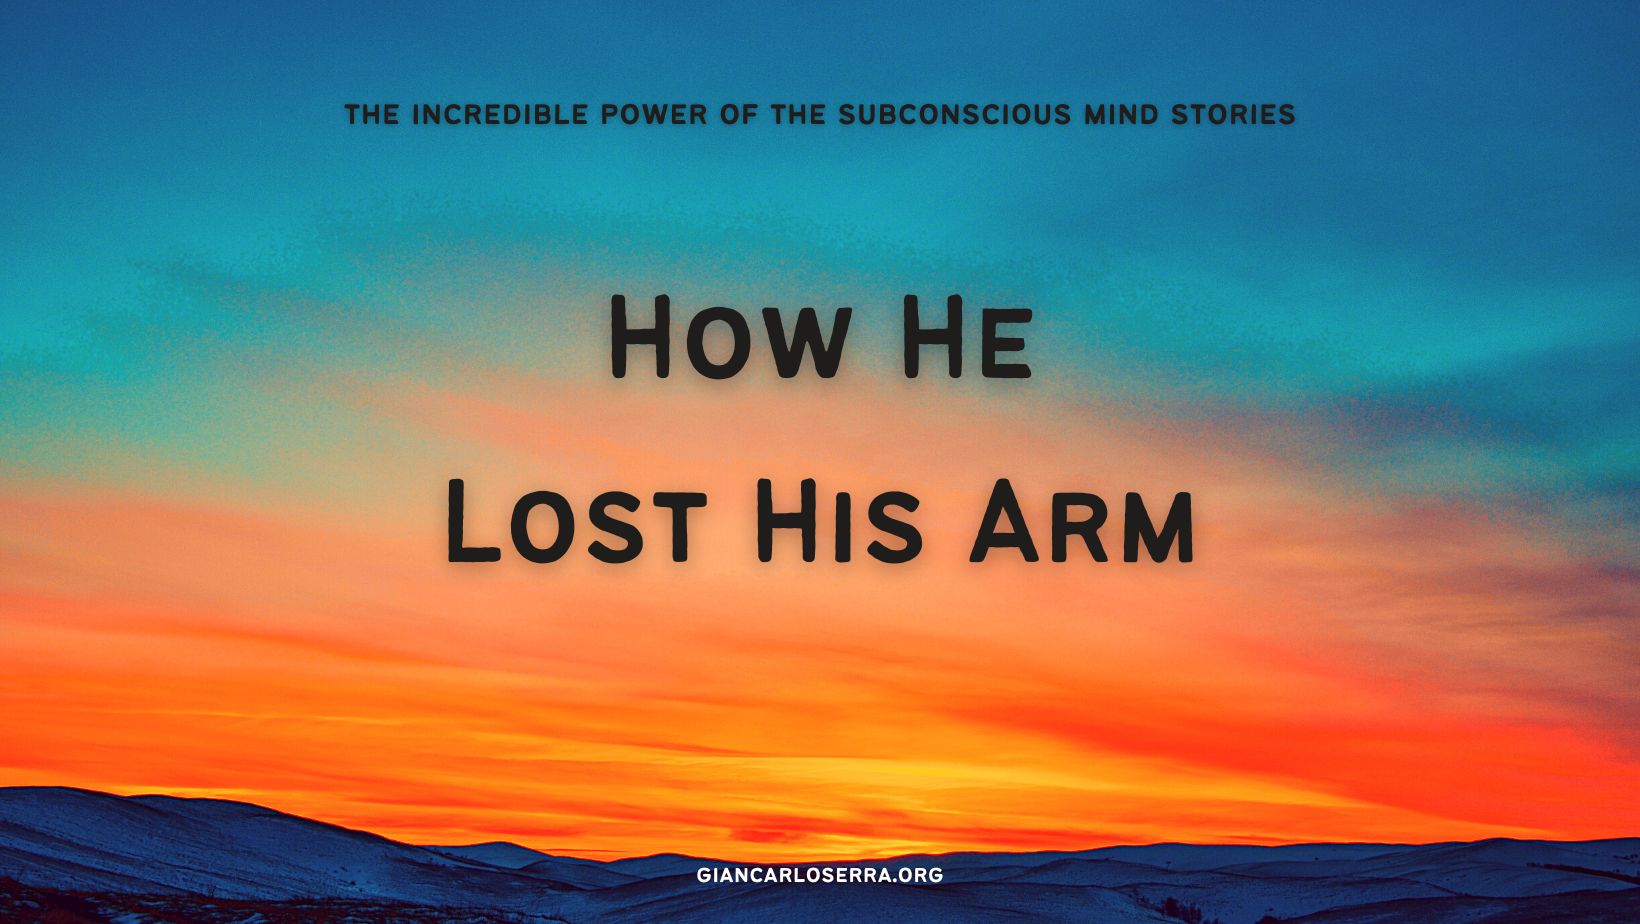 How He Lost His Arm